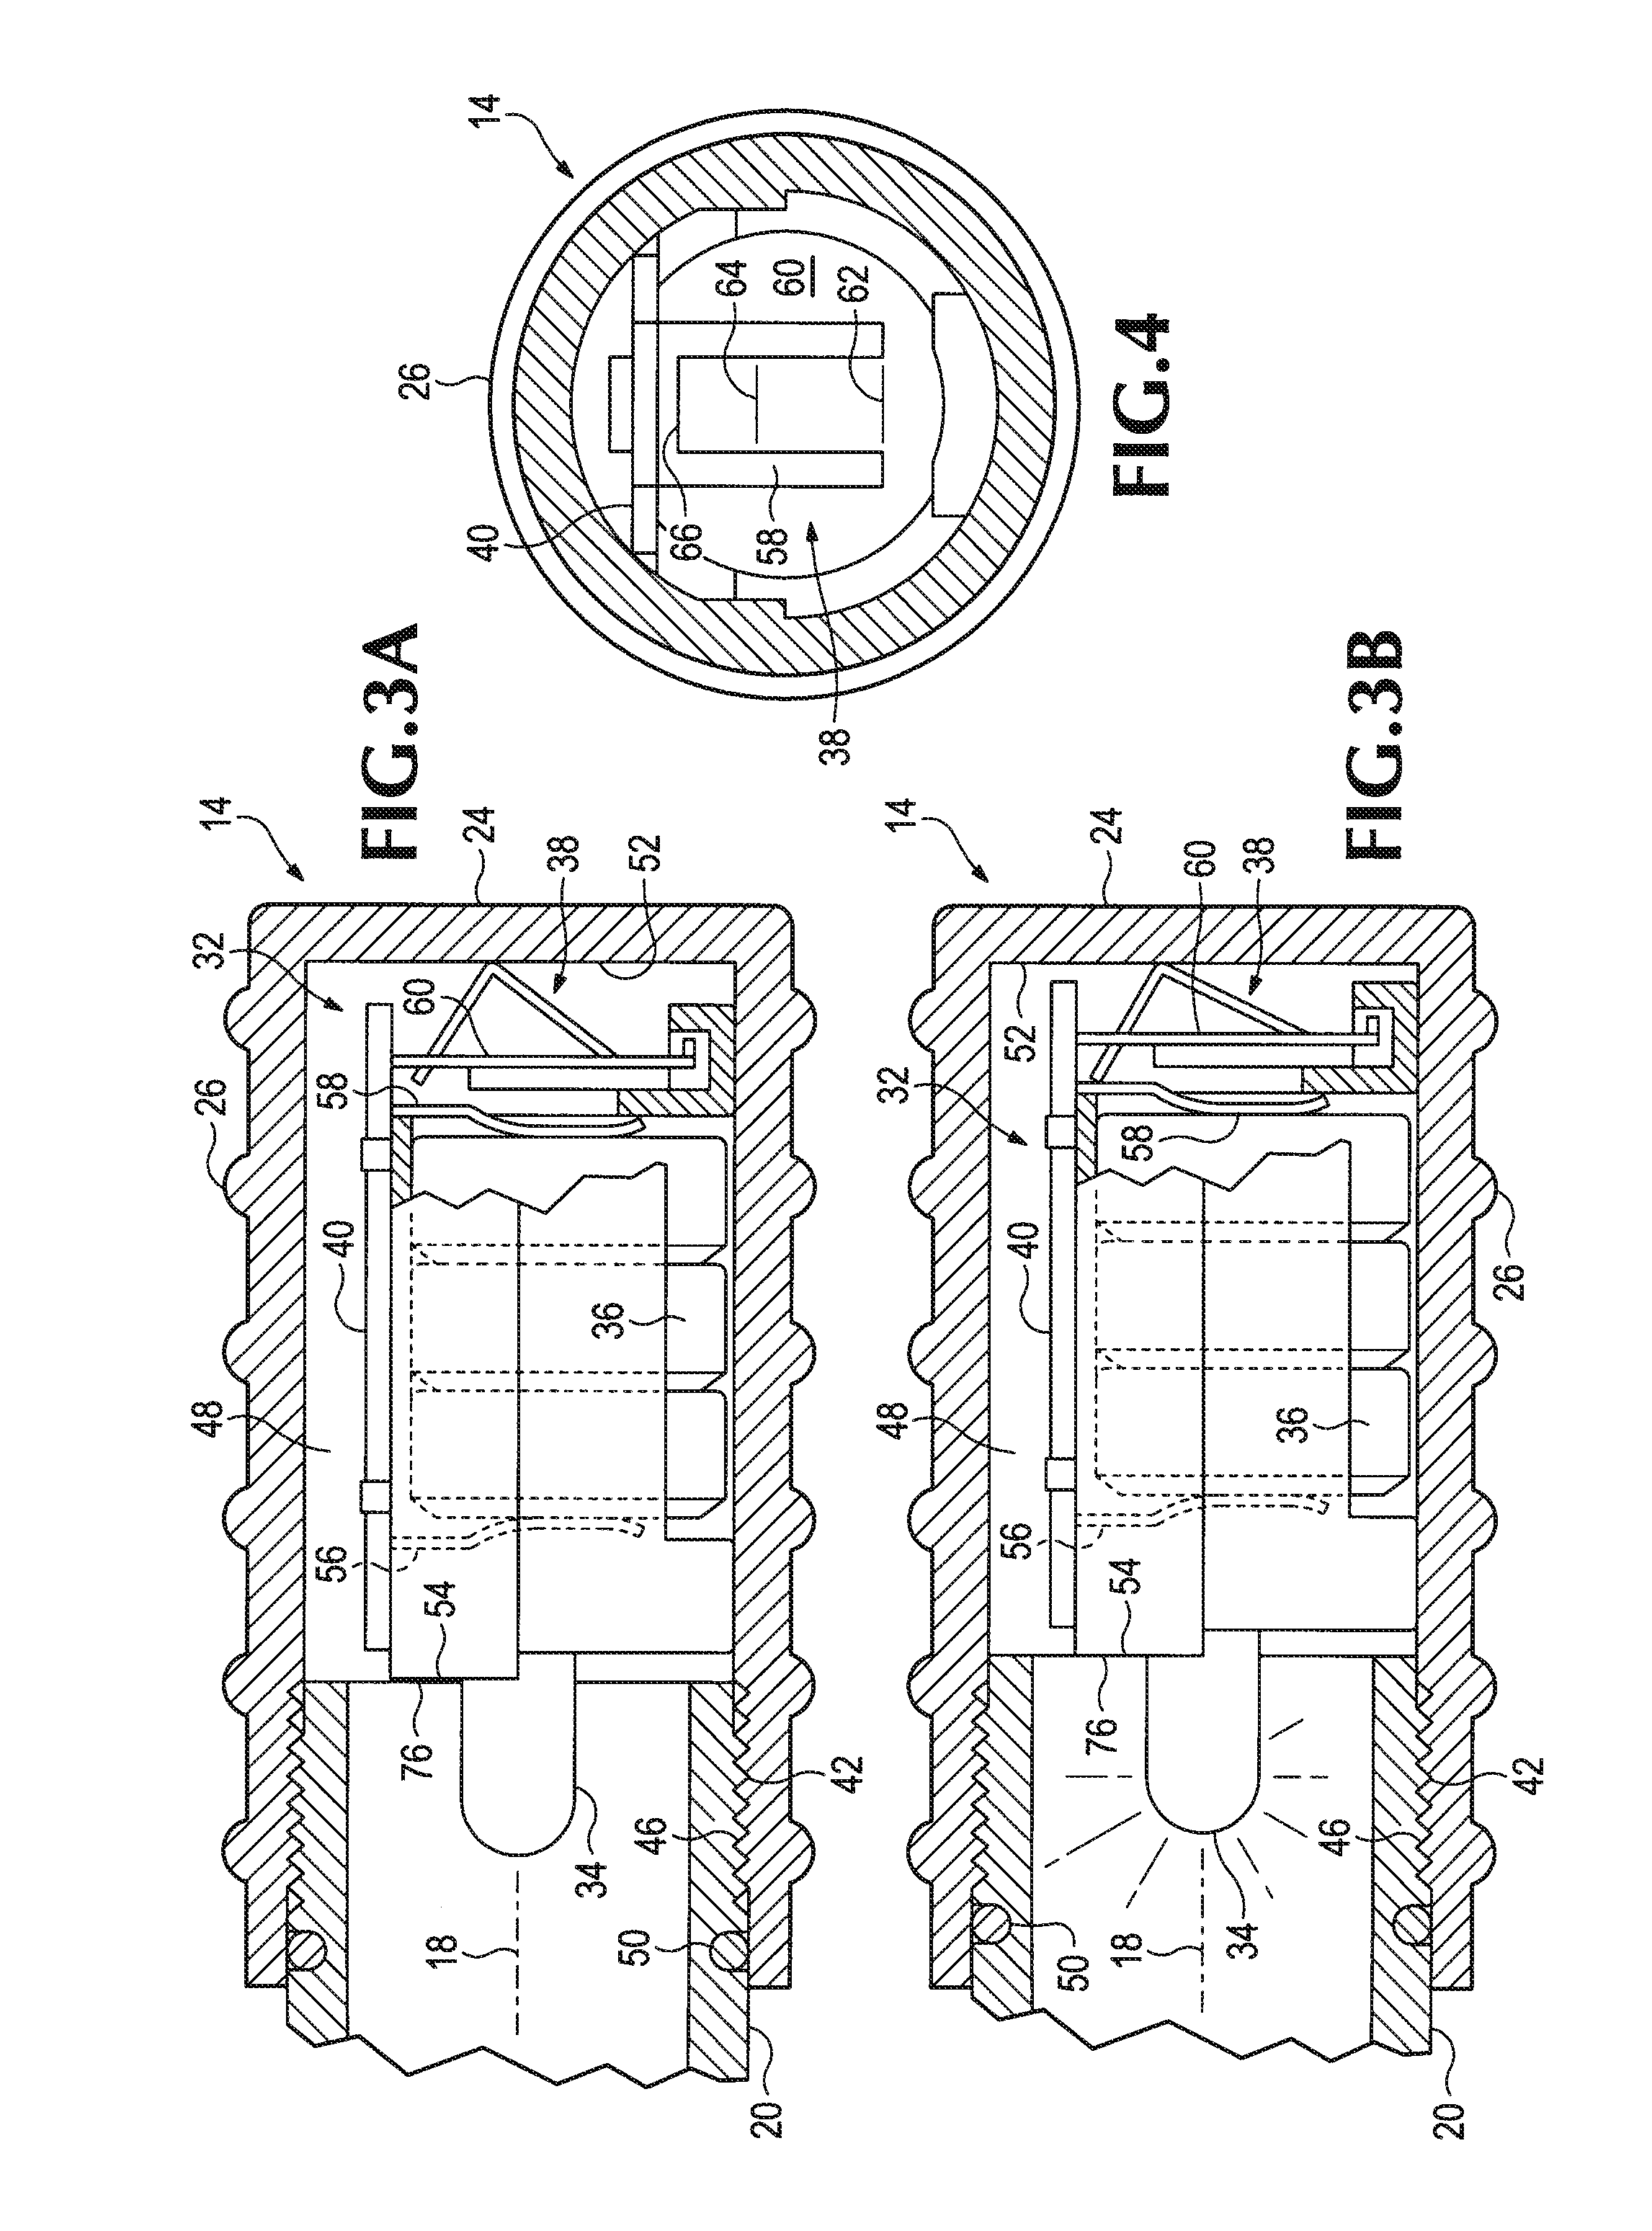 Electronic glow stick device with alternating flasher